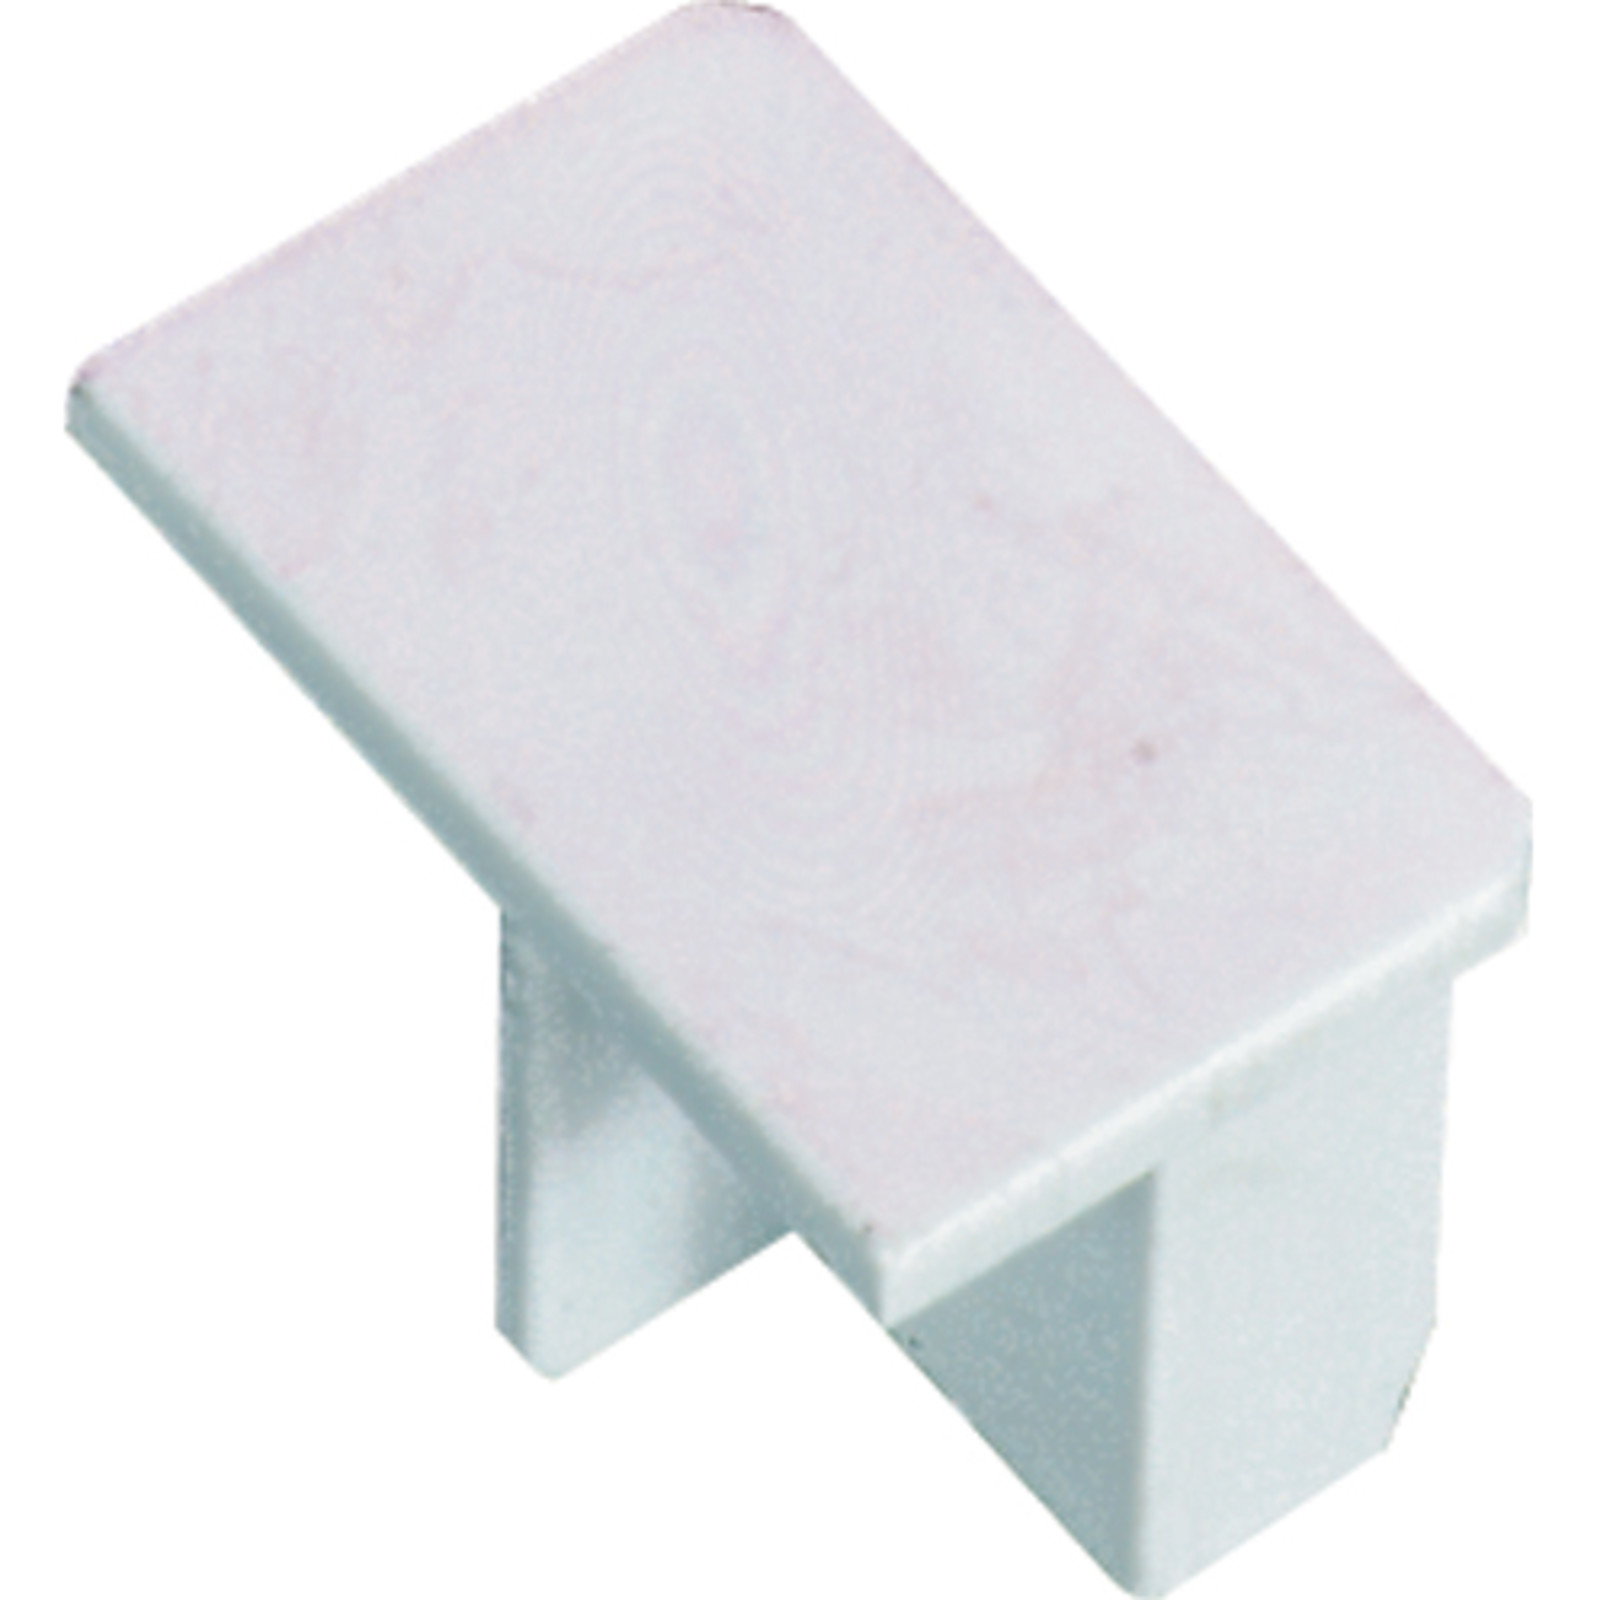 Maxi Trunking Fittings 100 x 100mm End Caps